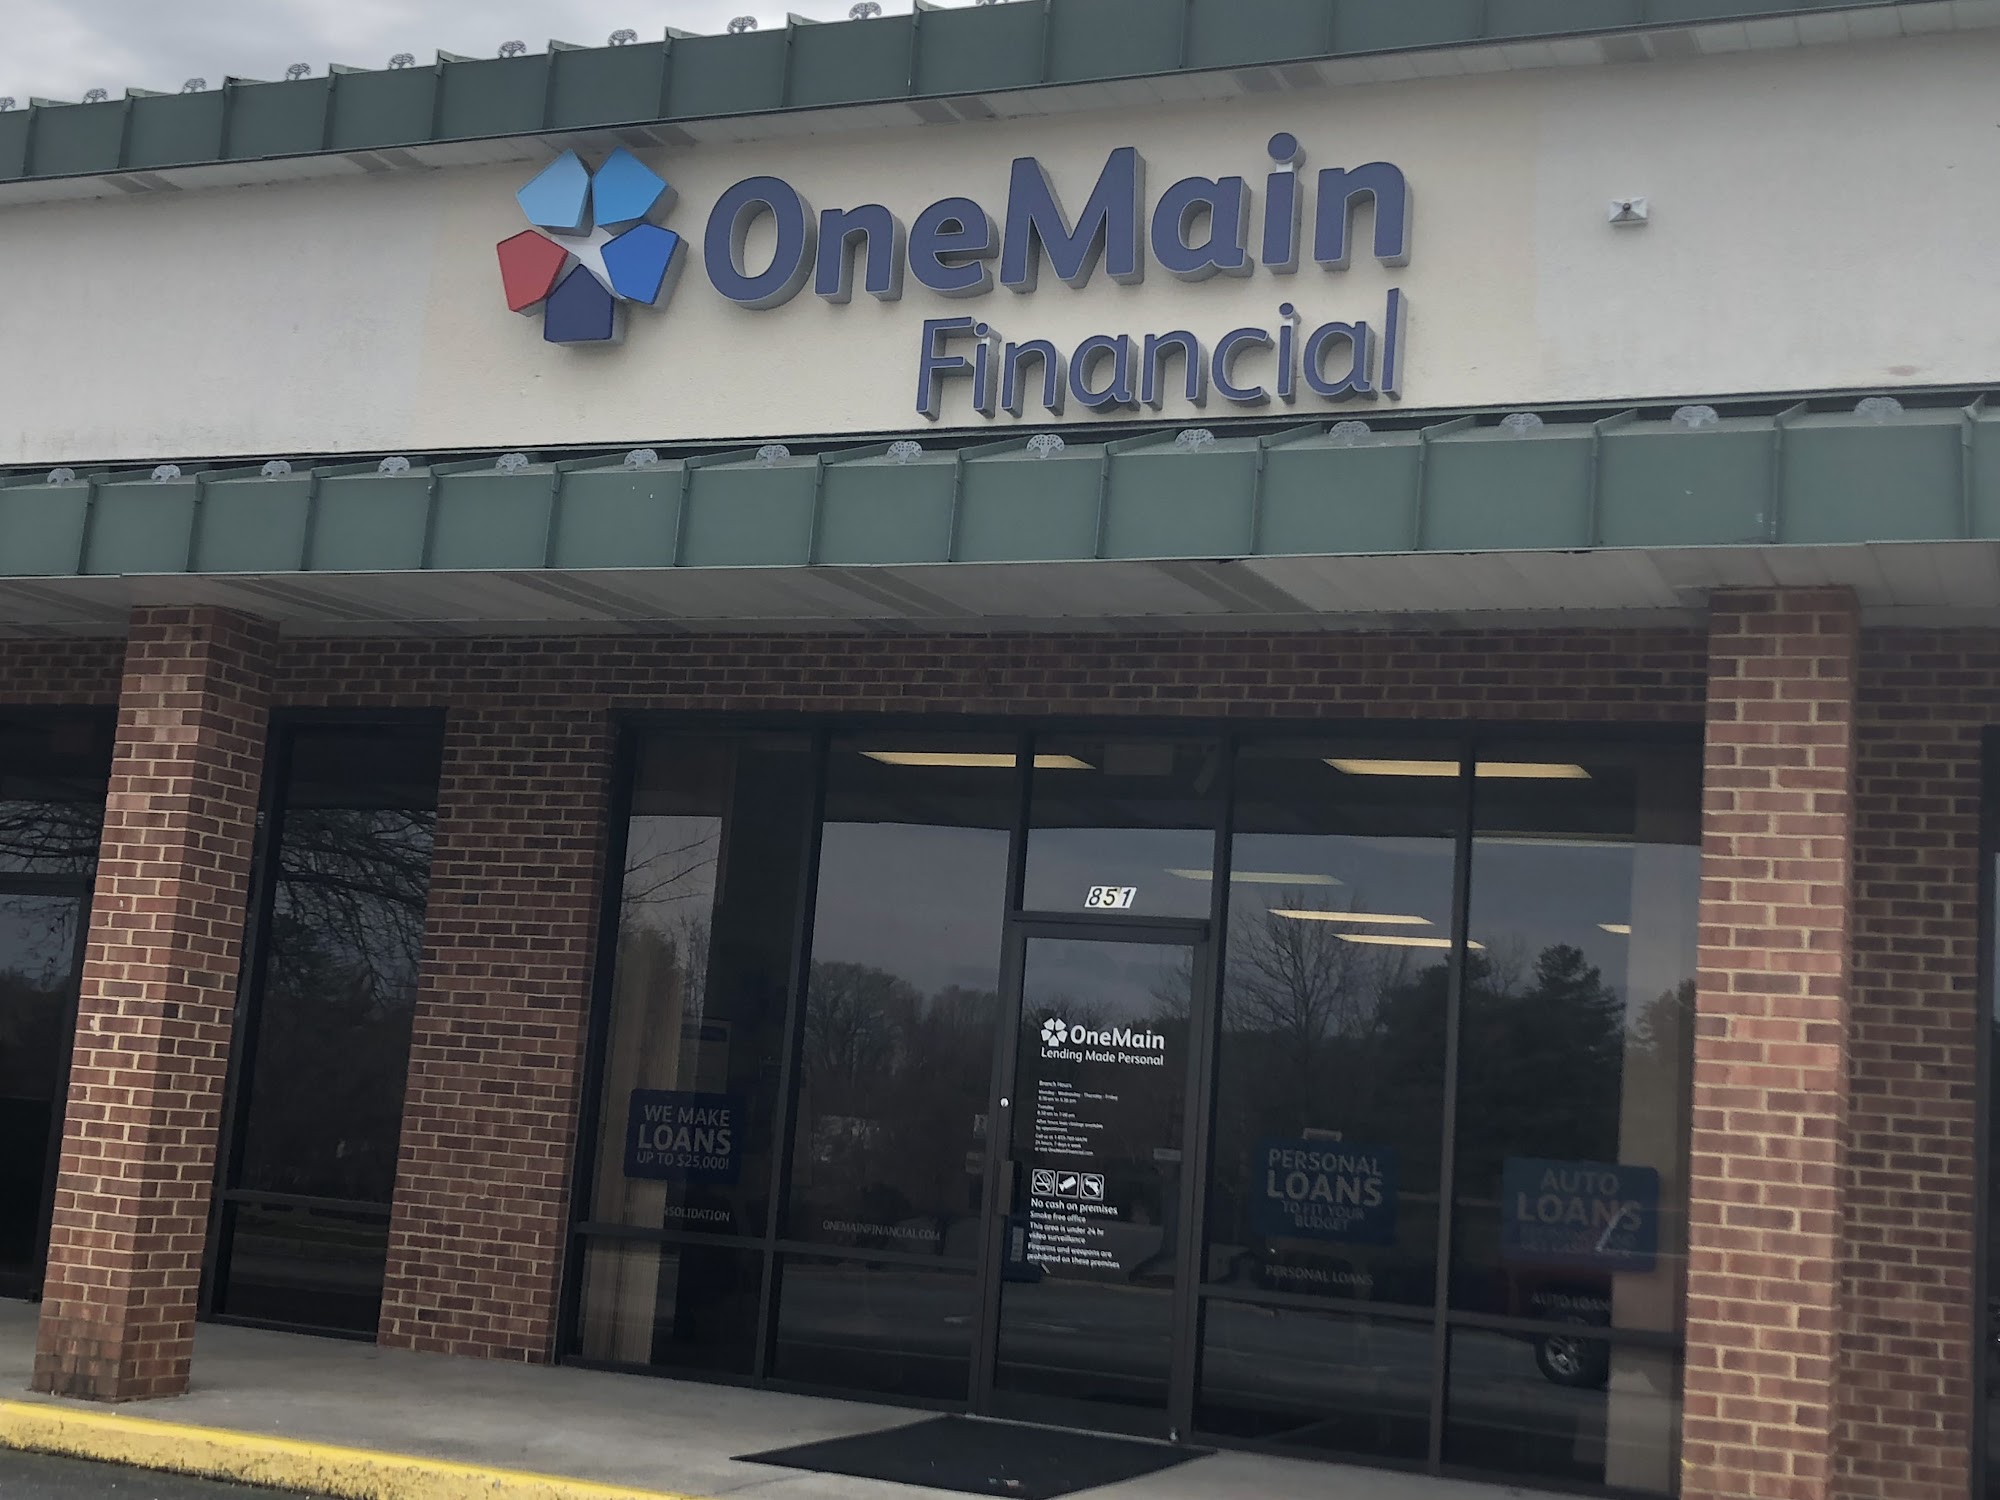 OneMain Financial 851 E 2nd St, Chase City Virginia 23924